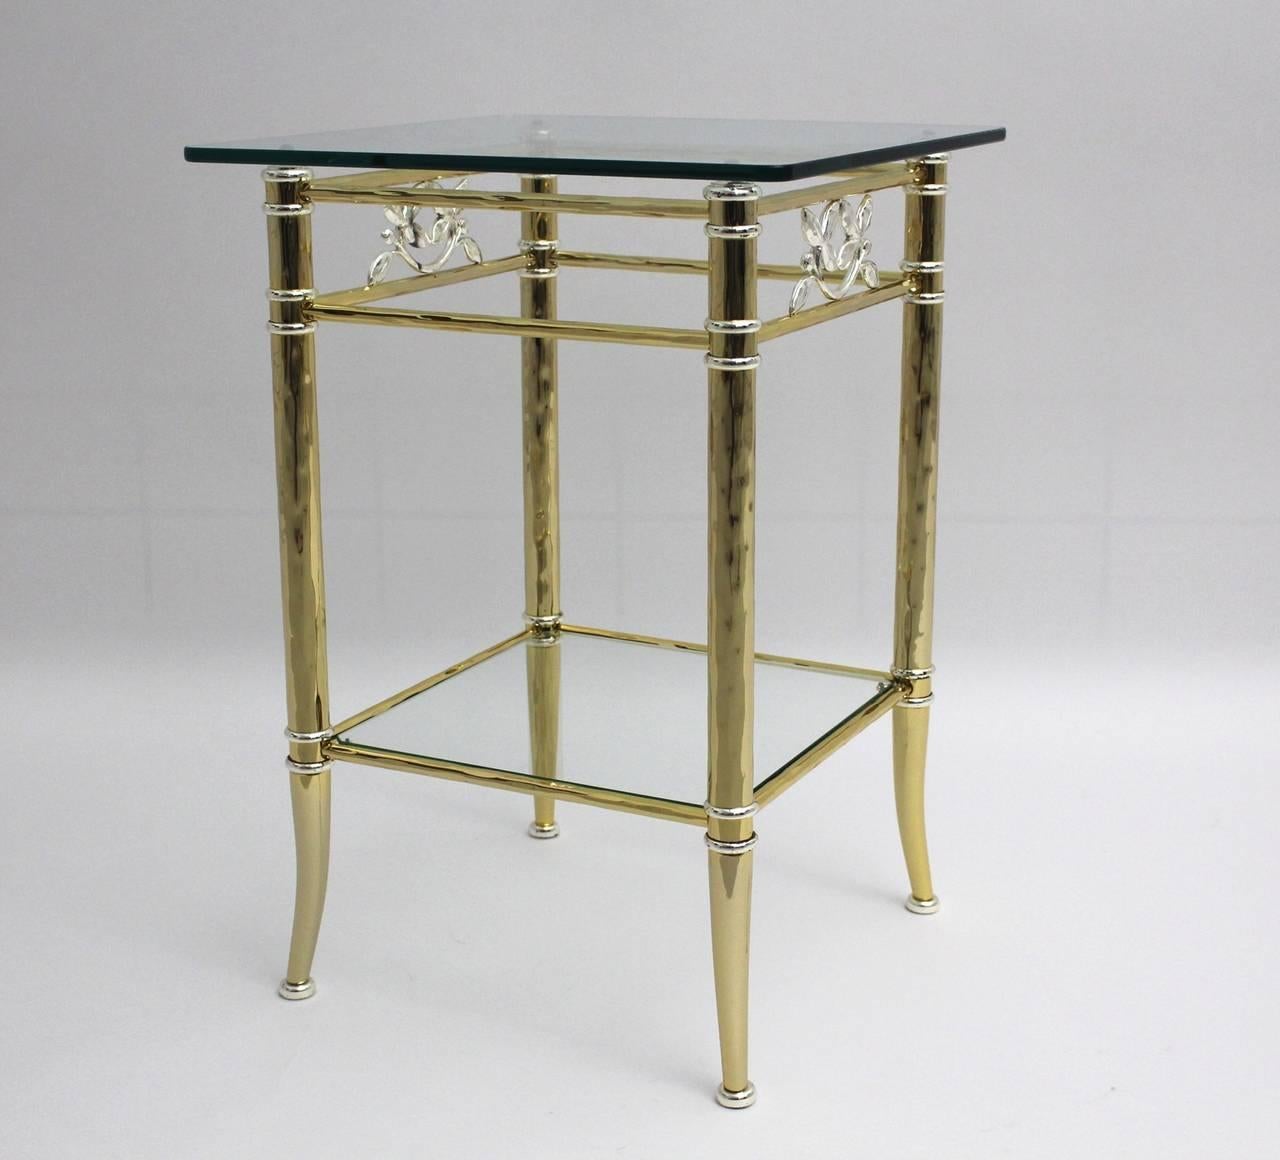 Extraordinary golden plated side table with silver plated flower elements and two glass plates.
Very good condition

all measures are approximate